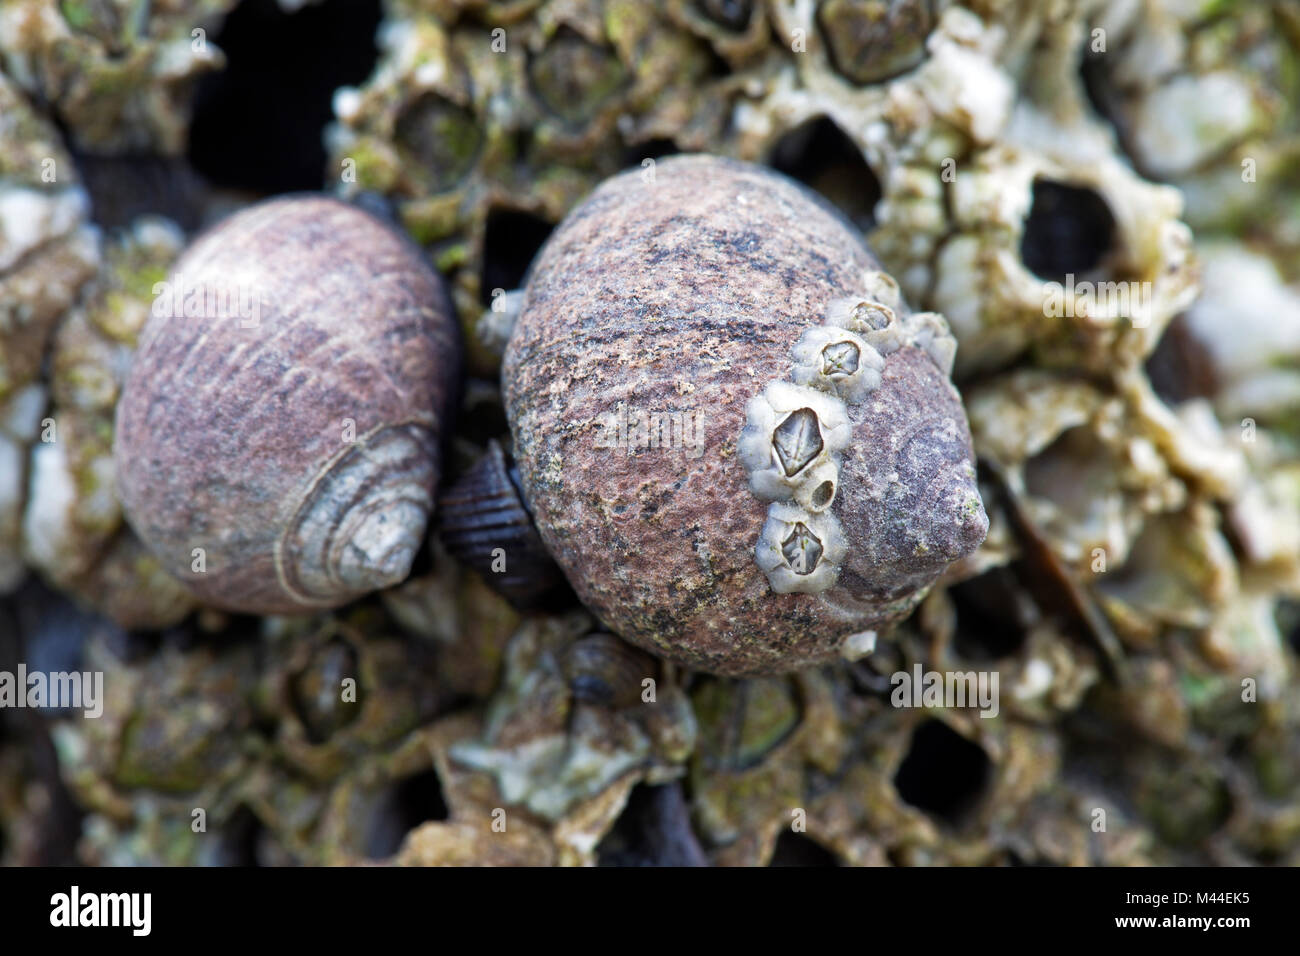 Common Periwinkles (Littorina littorea) and barnacles in the intertidal zone. North Sea, Germany Stock Photo